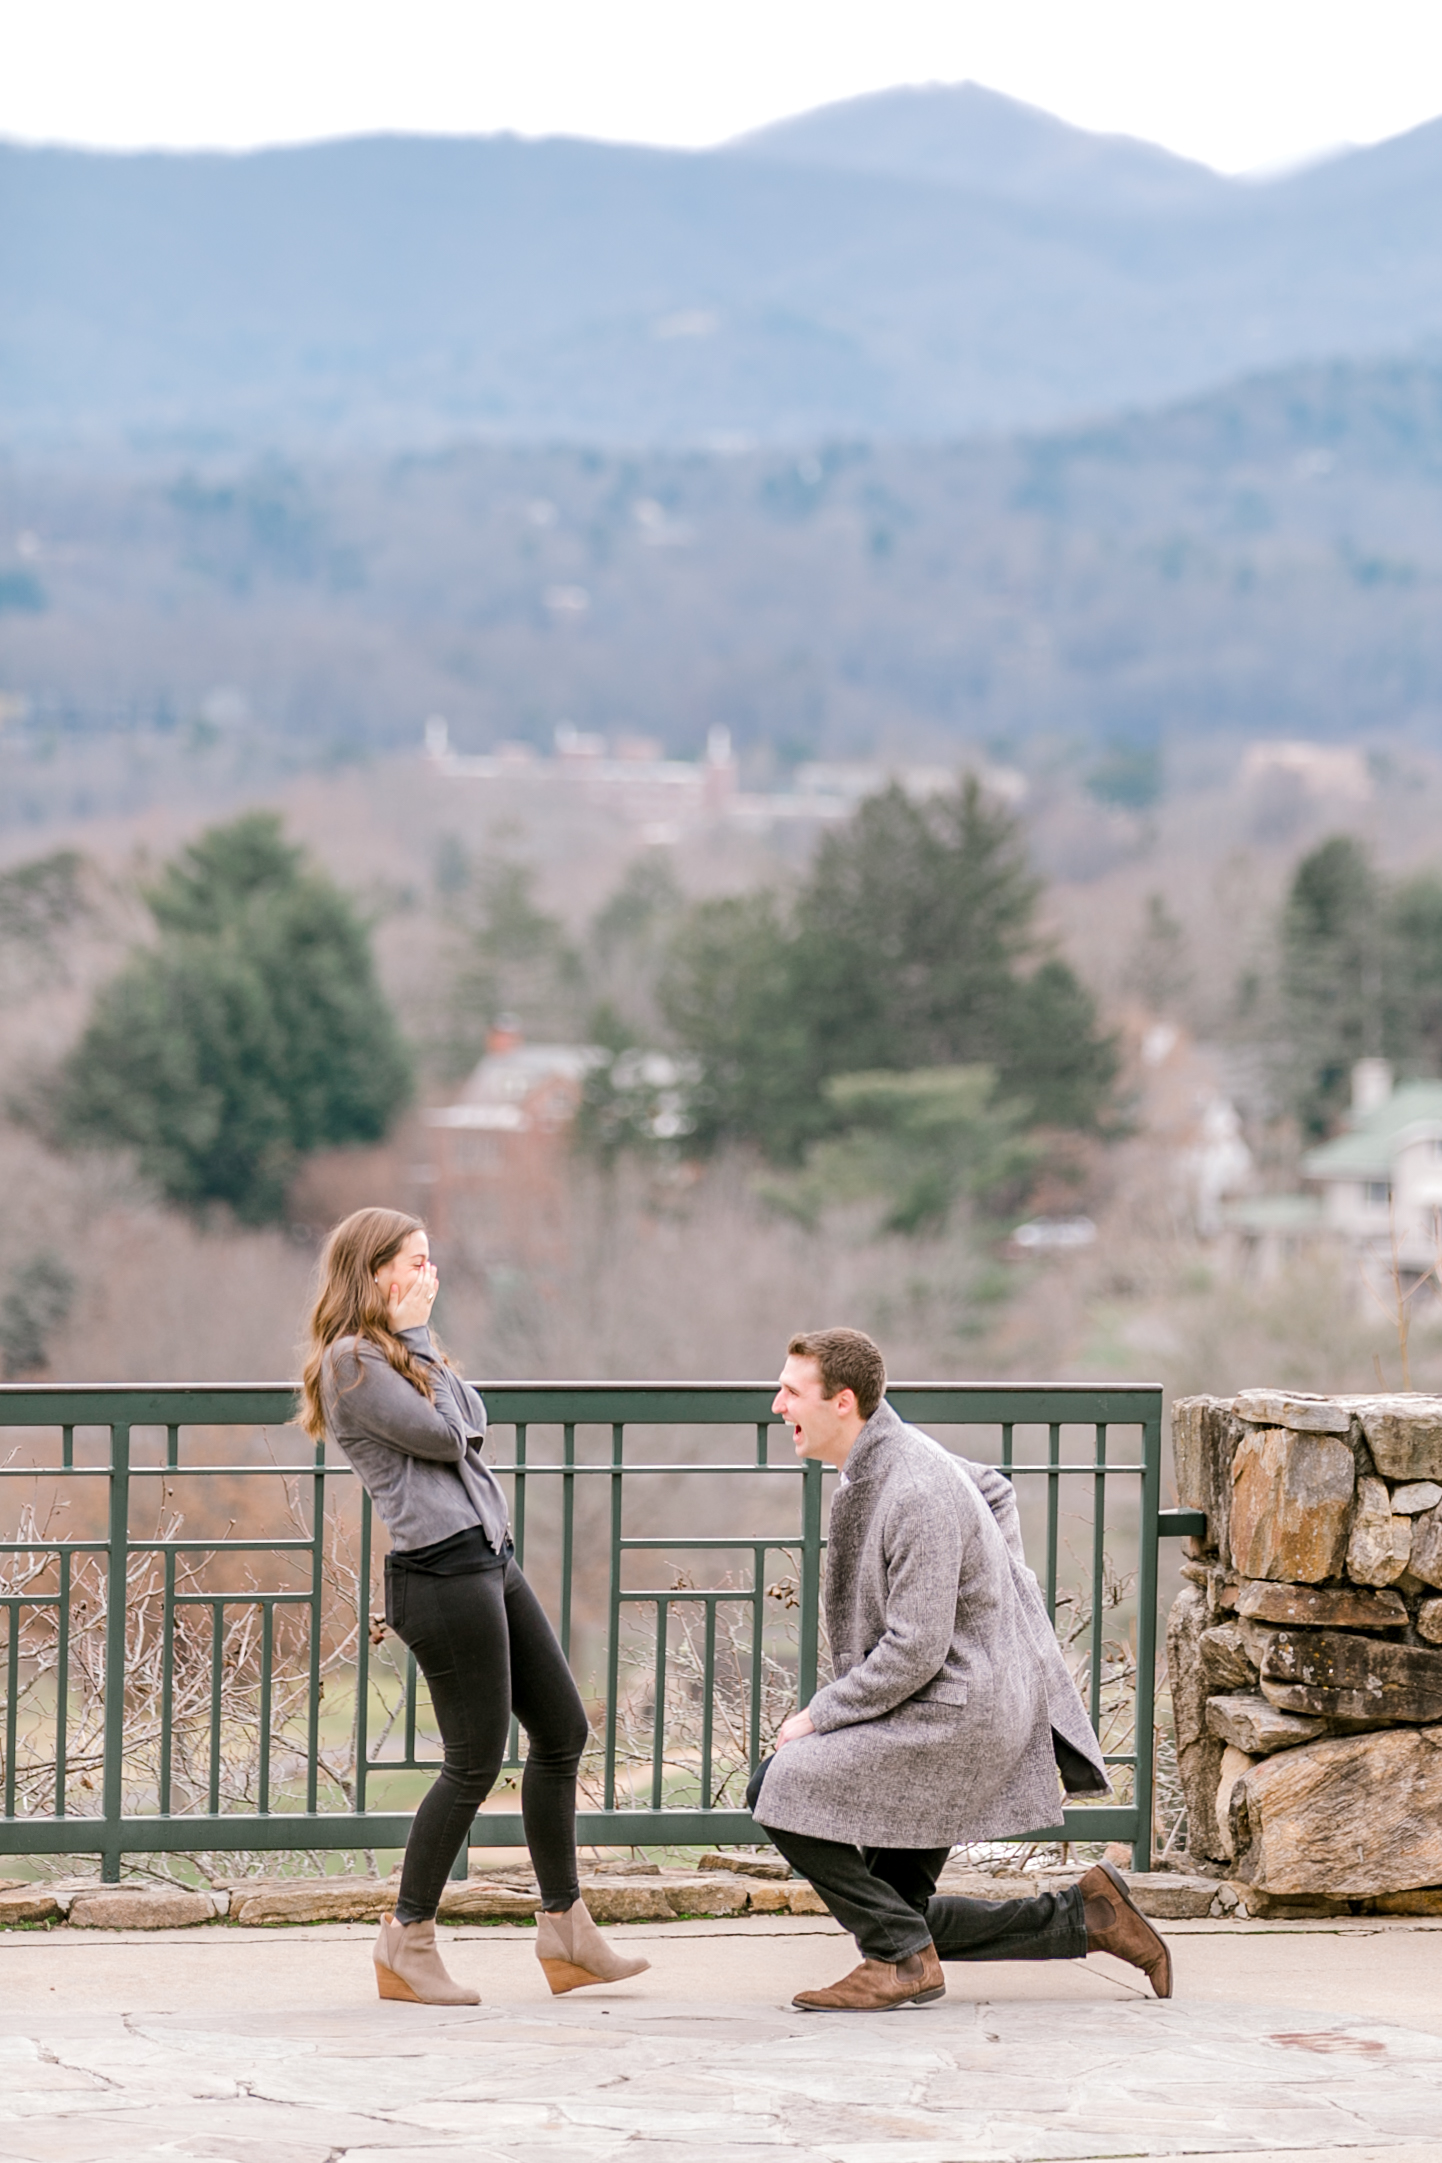 Where can i propose in greenville sc?